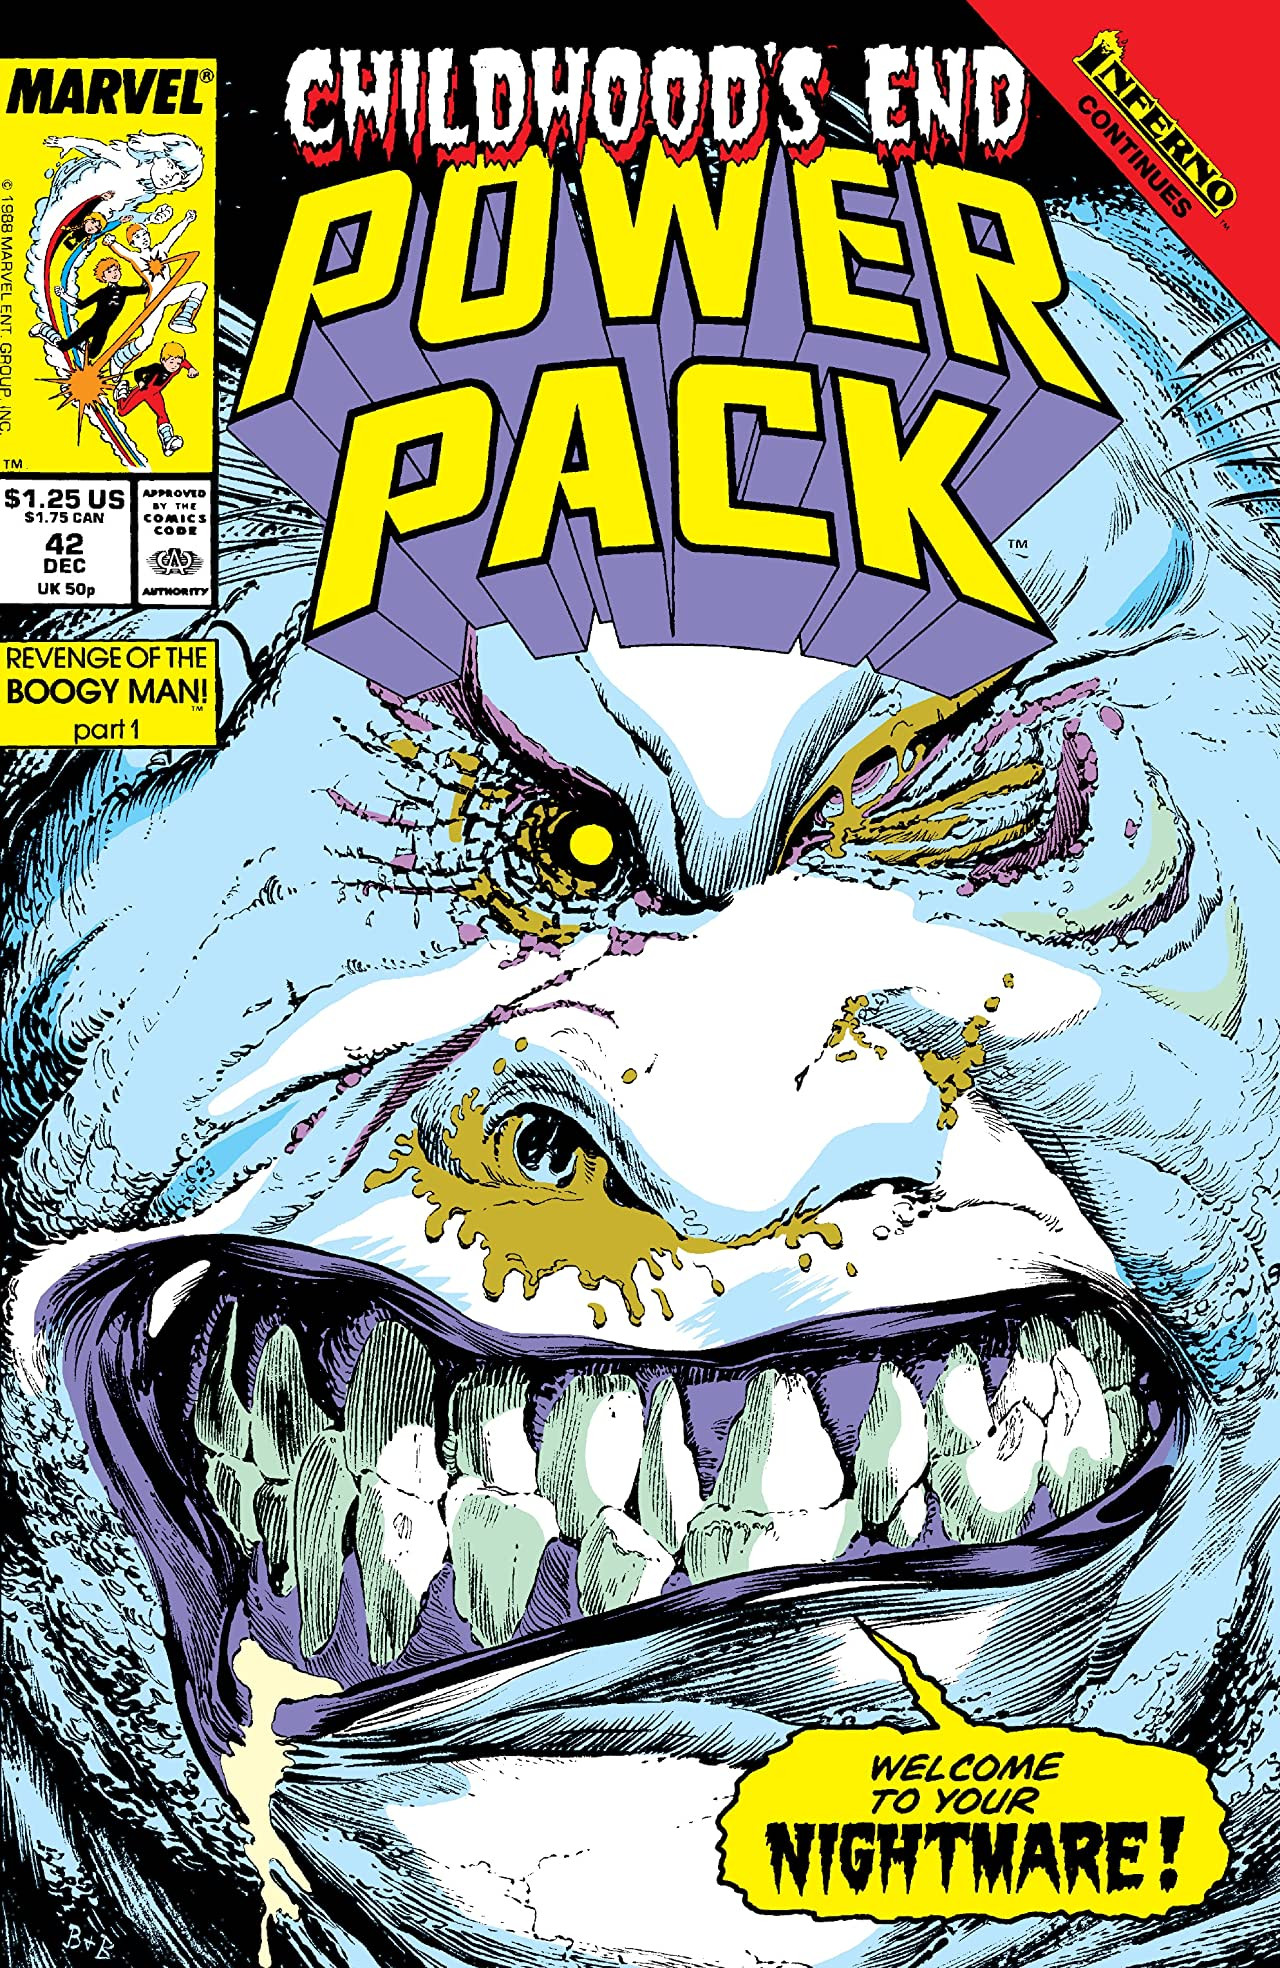 Power Pack Vol 1 42 Marvel Database Fandom Powered By Wikia 